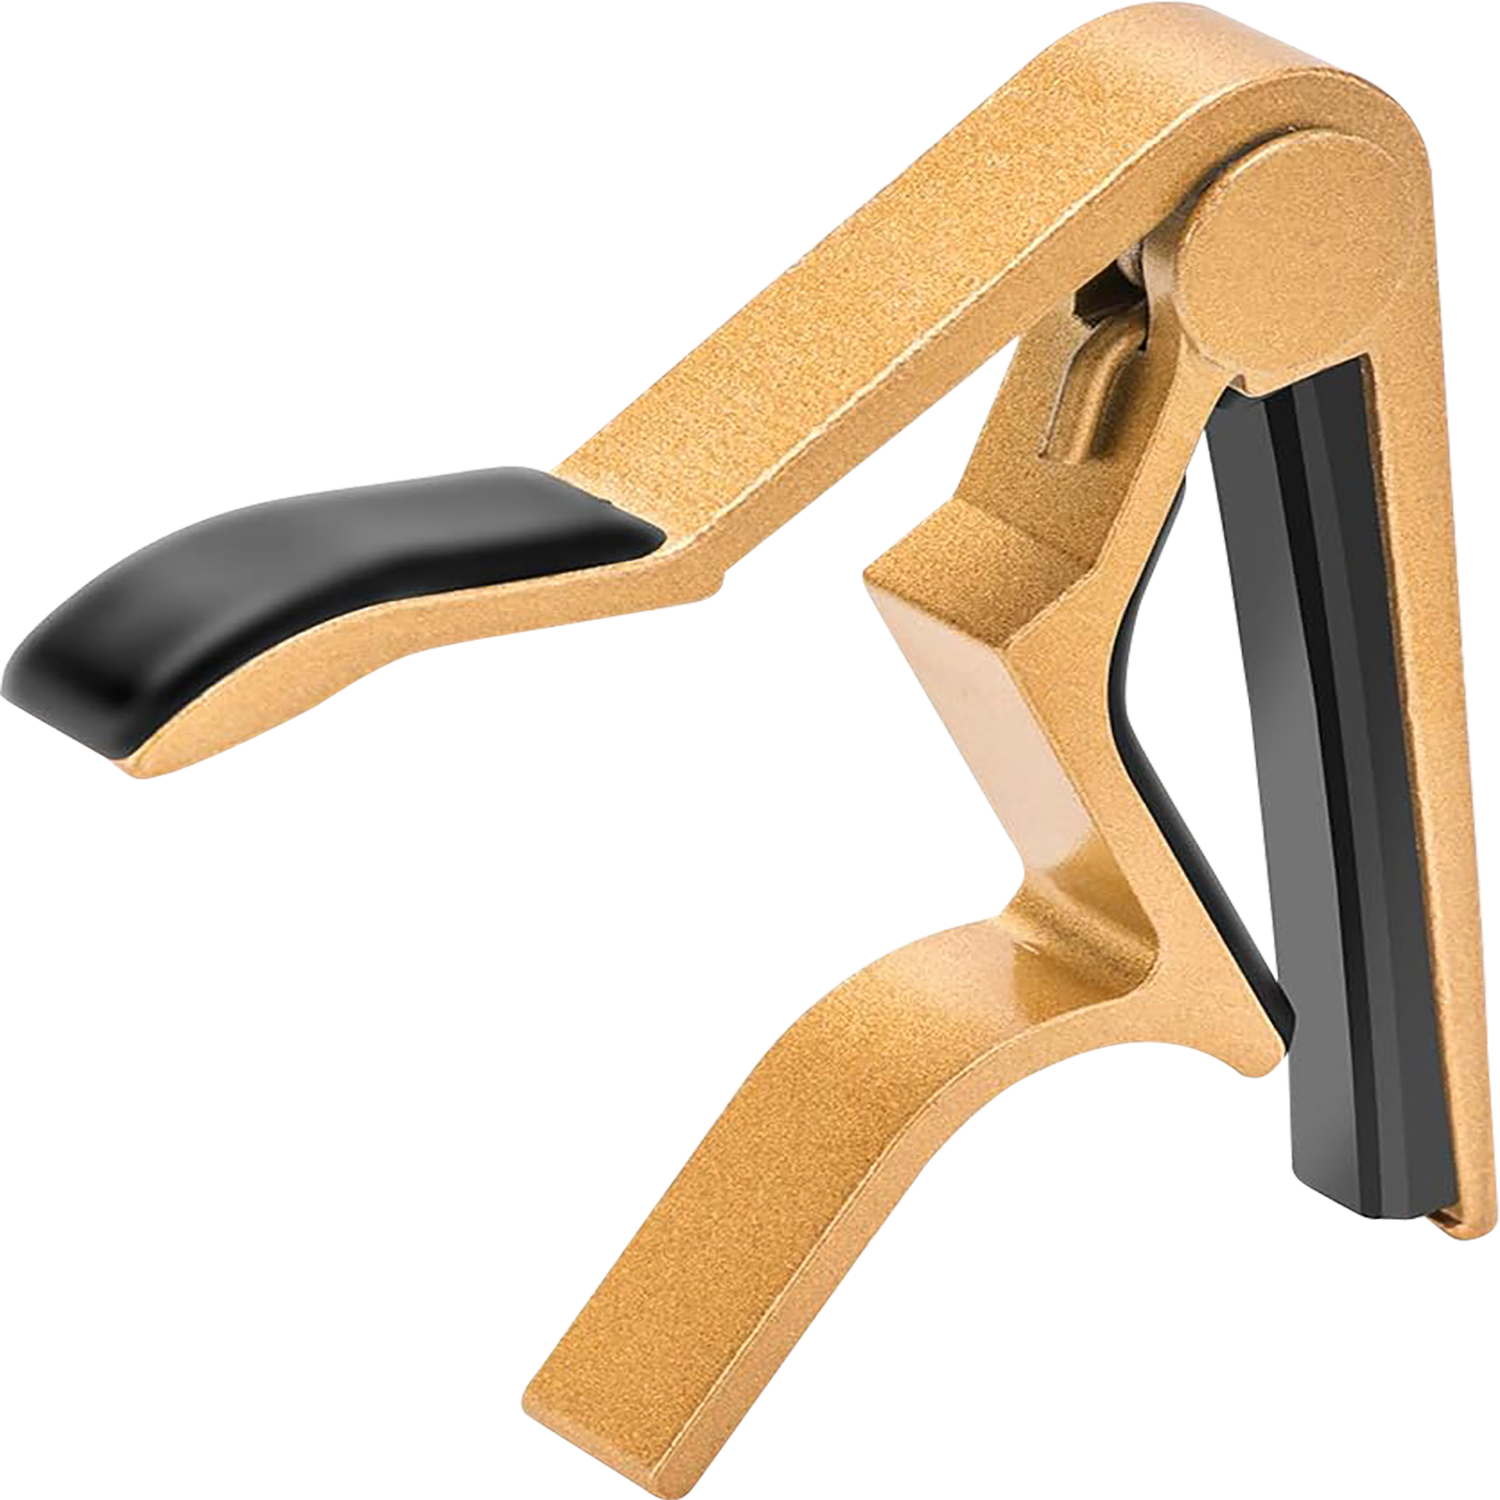 5 Core Guitar Capo 6 String Kapo Universal Clamp w Soft Padding for Acoustic Electric Guitars 1/2 Pc